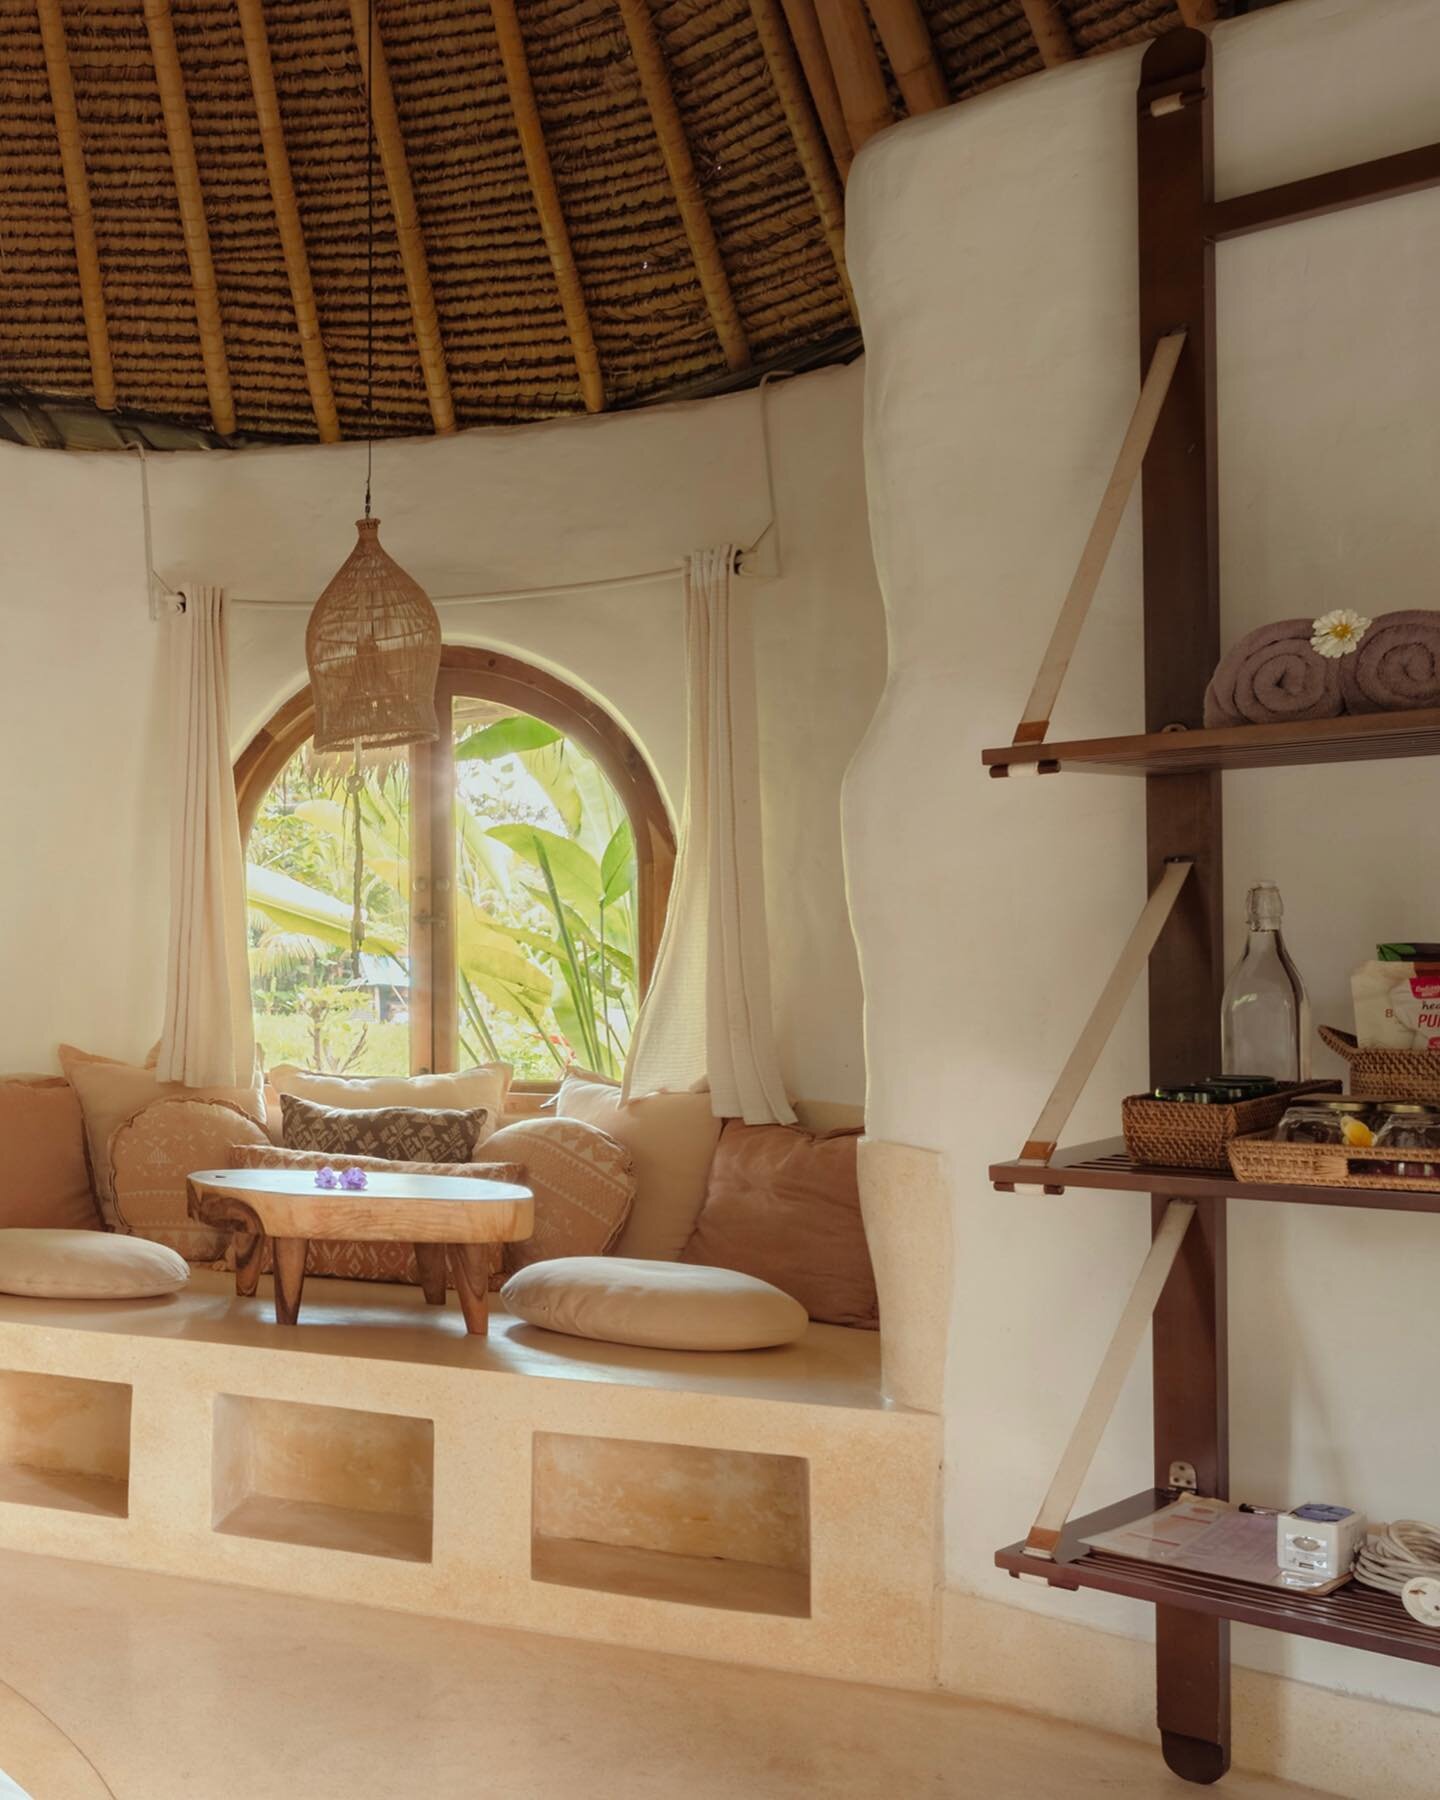 Escape to your own private sanctuary with our comfortable earth bag villas. Relax, unwind, and indulge in the comfort and serenity of your own personal paradise.